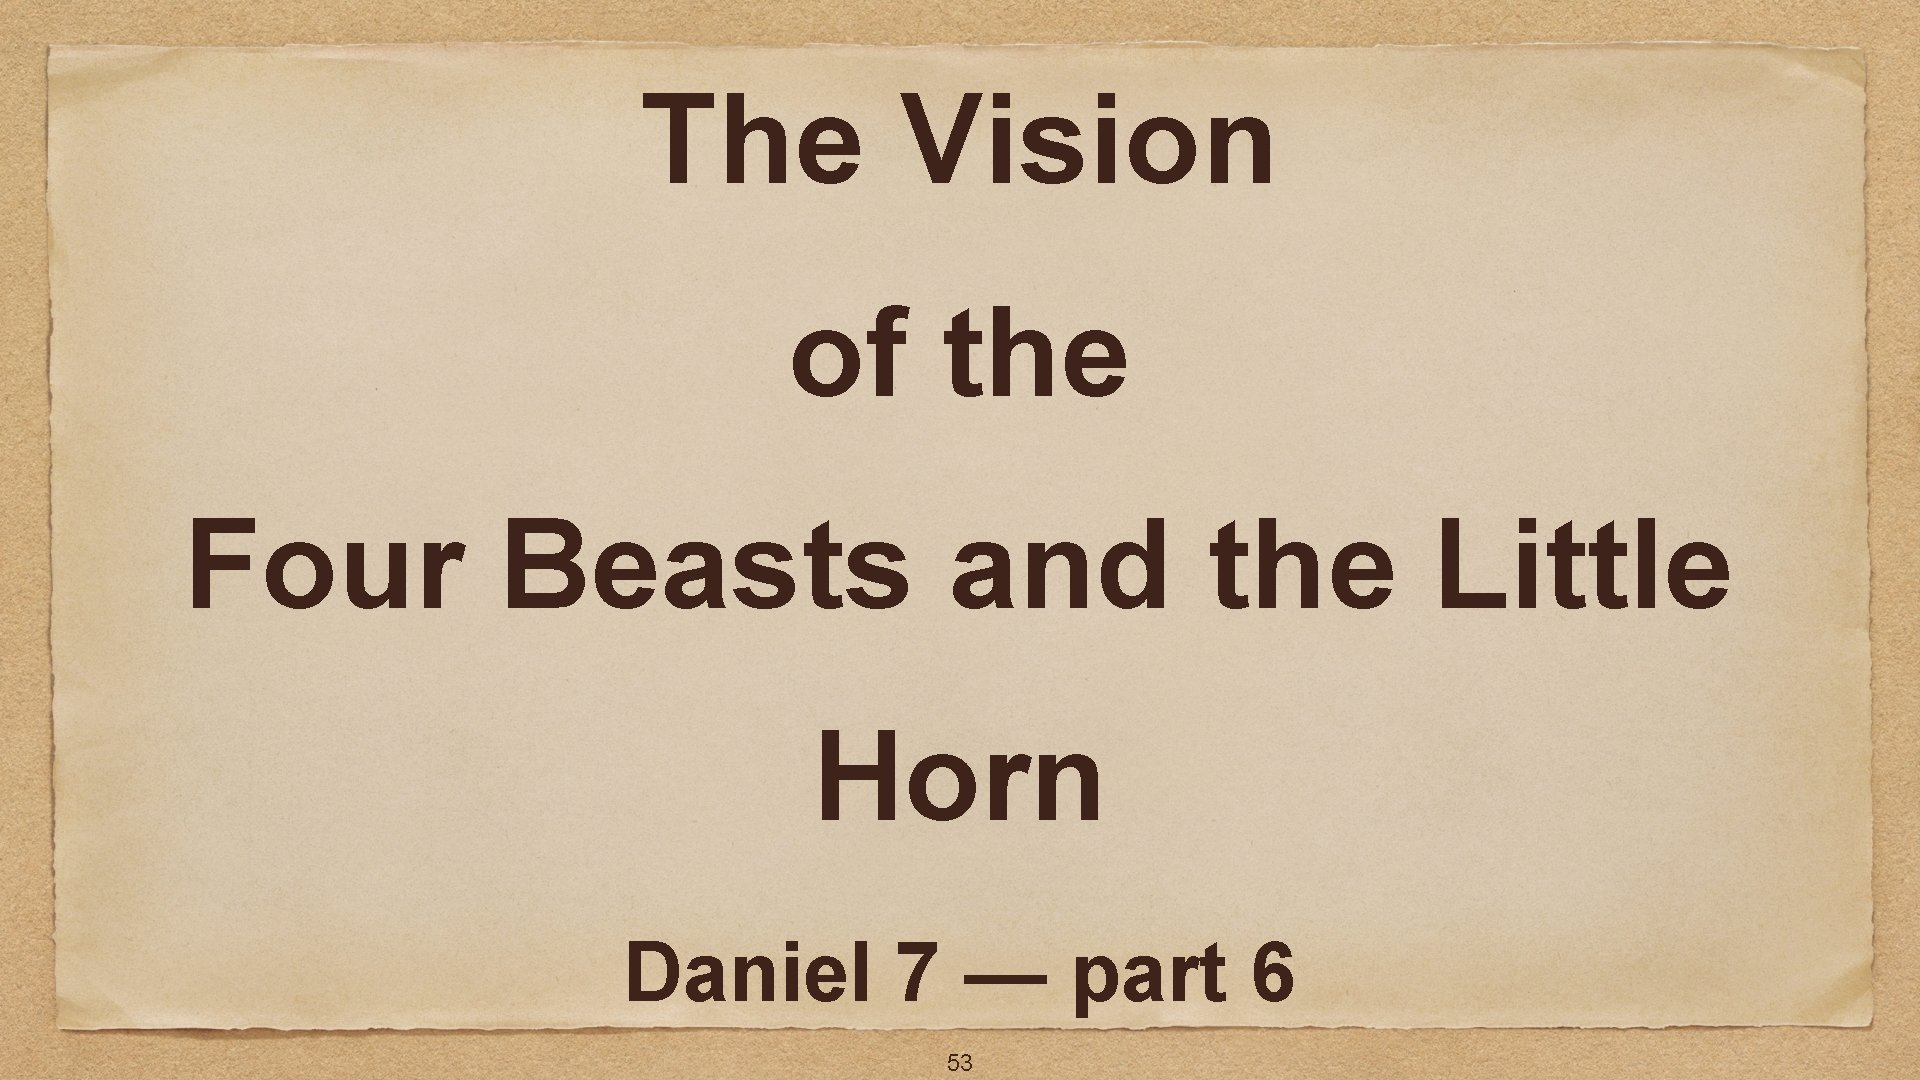 The Vision of the Four Beasts and the Little Horn Daniel 7 — part